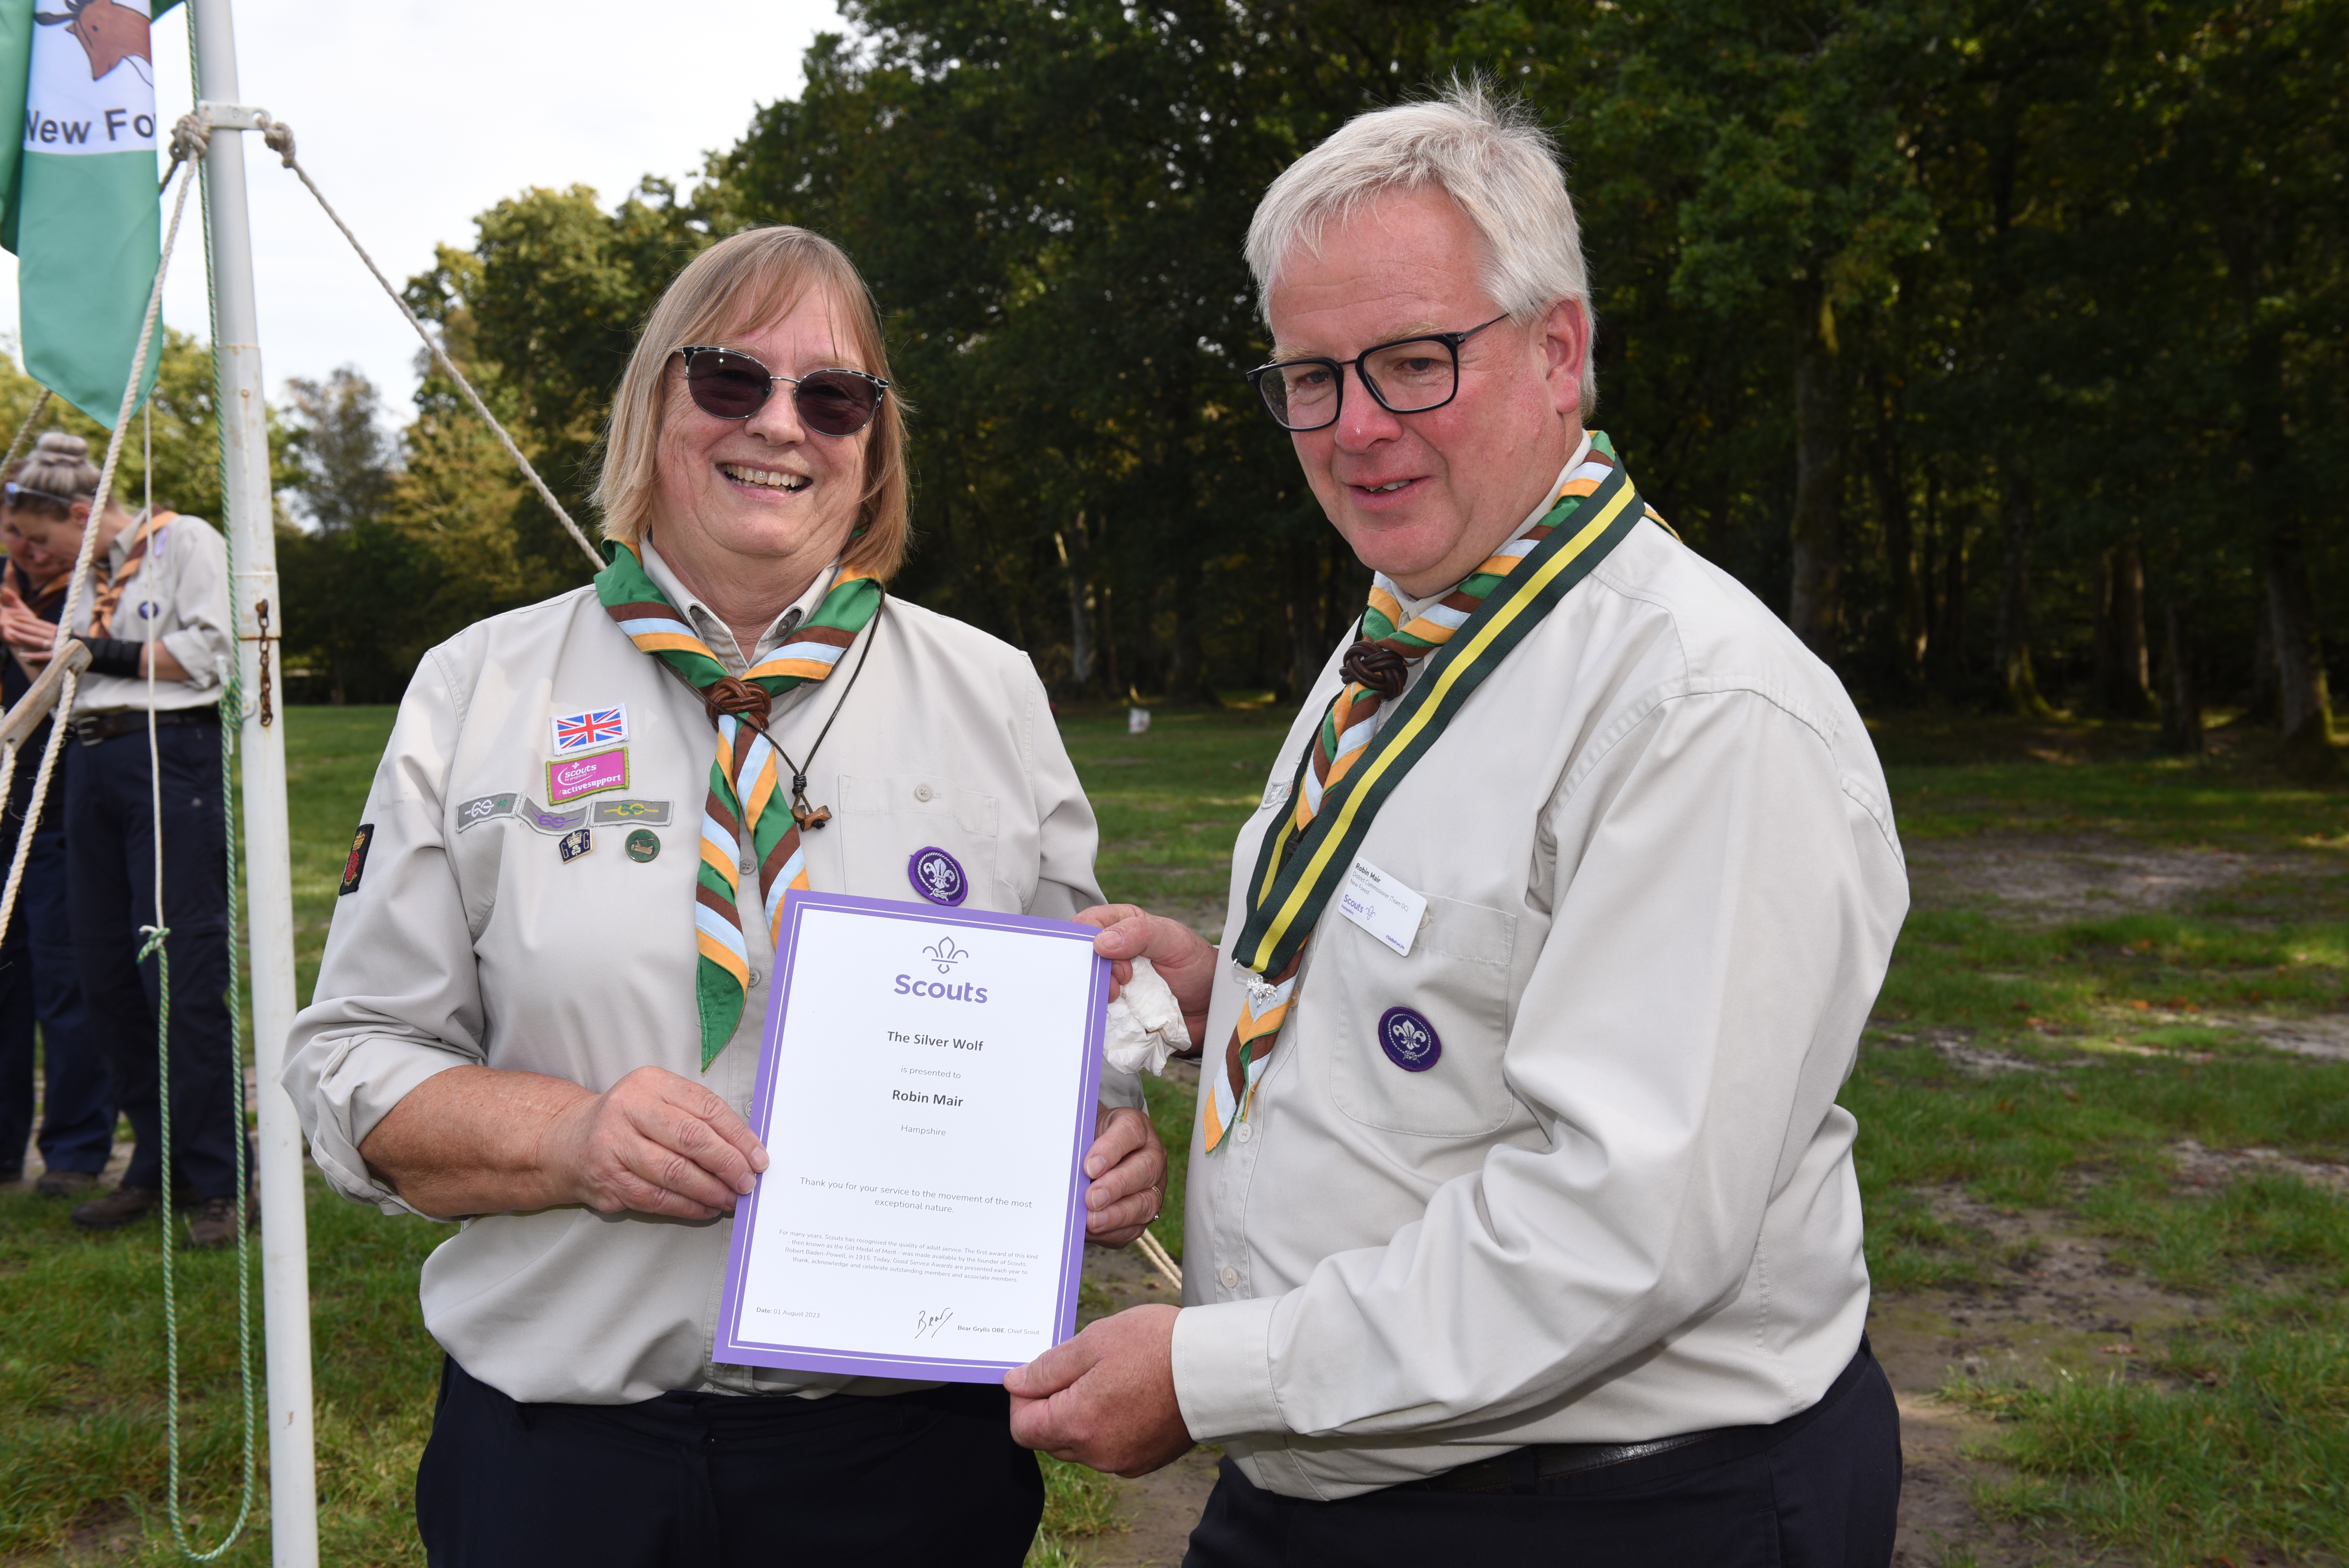 Robin Mair (r) received a certificate from Donna Kerrigan (l) at an outdoor campsite.